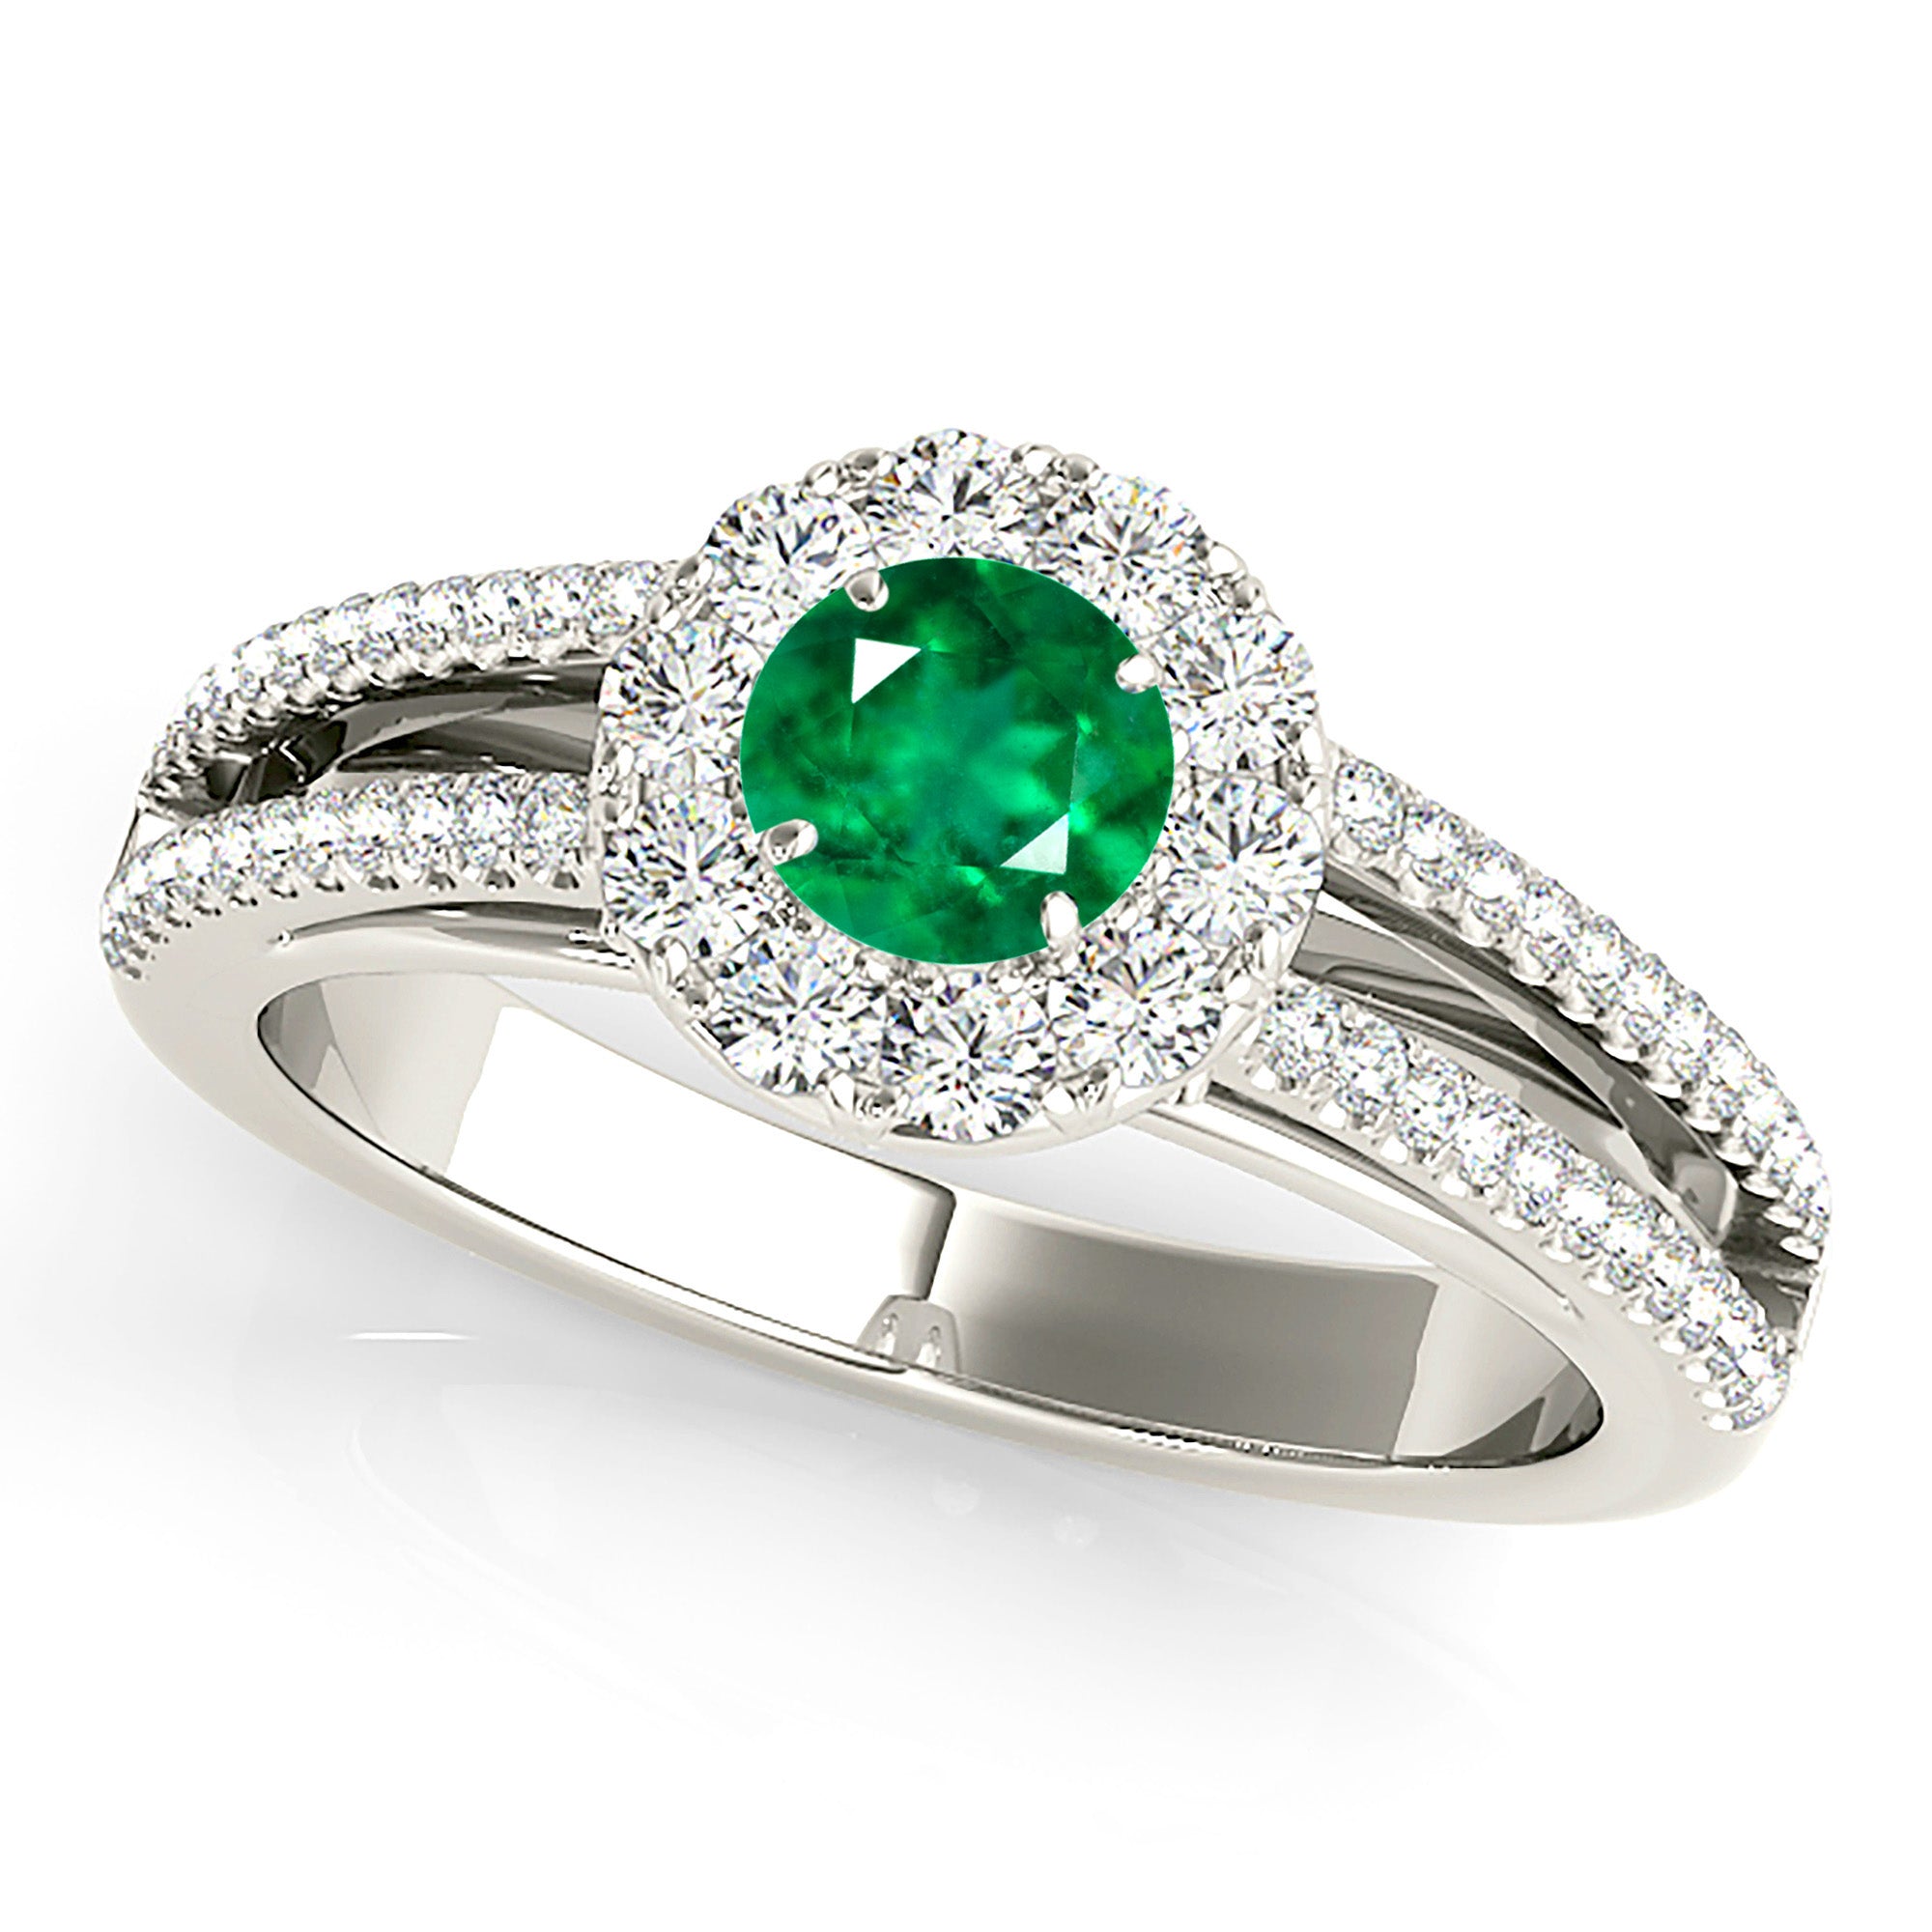 0.83 ct. Genuine Emerald Ring With 0.50 ctw. Diamond Halo And Split Band-in 14K/18K White, Yellow, Rose Gold and Platinum - Christmas Jewelry Gift -VIRABYANI